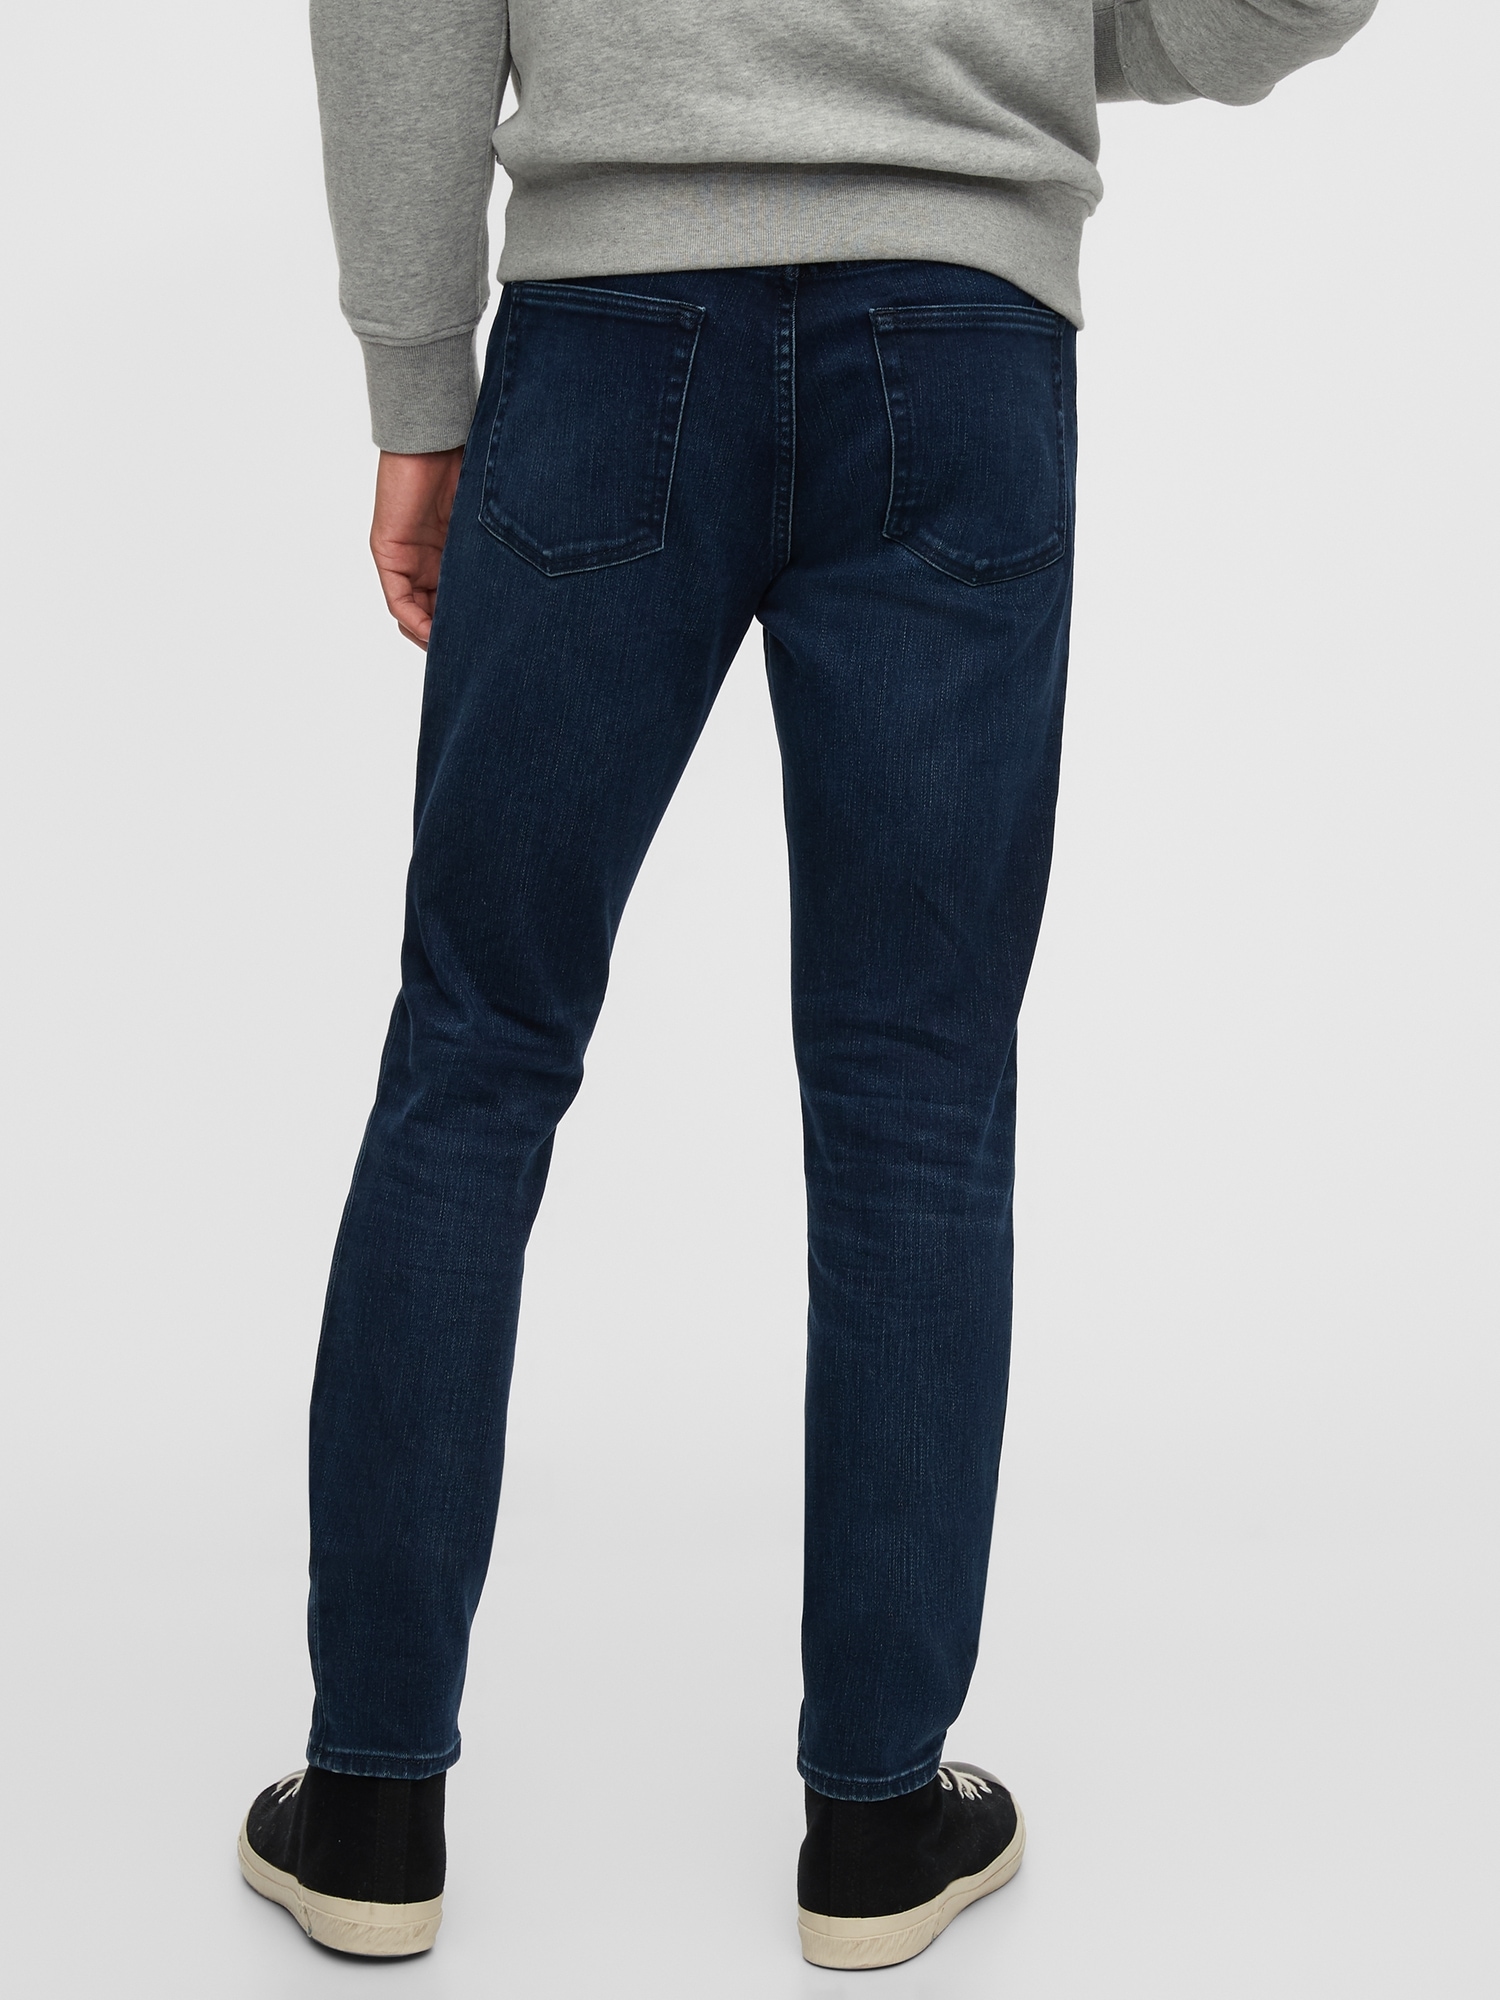 Soft Wear Slim Jeans with Washwell